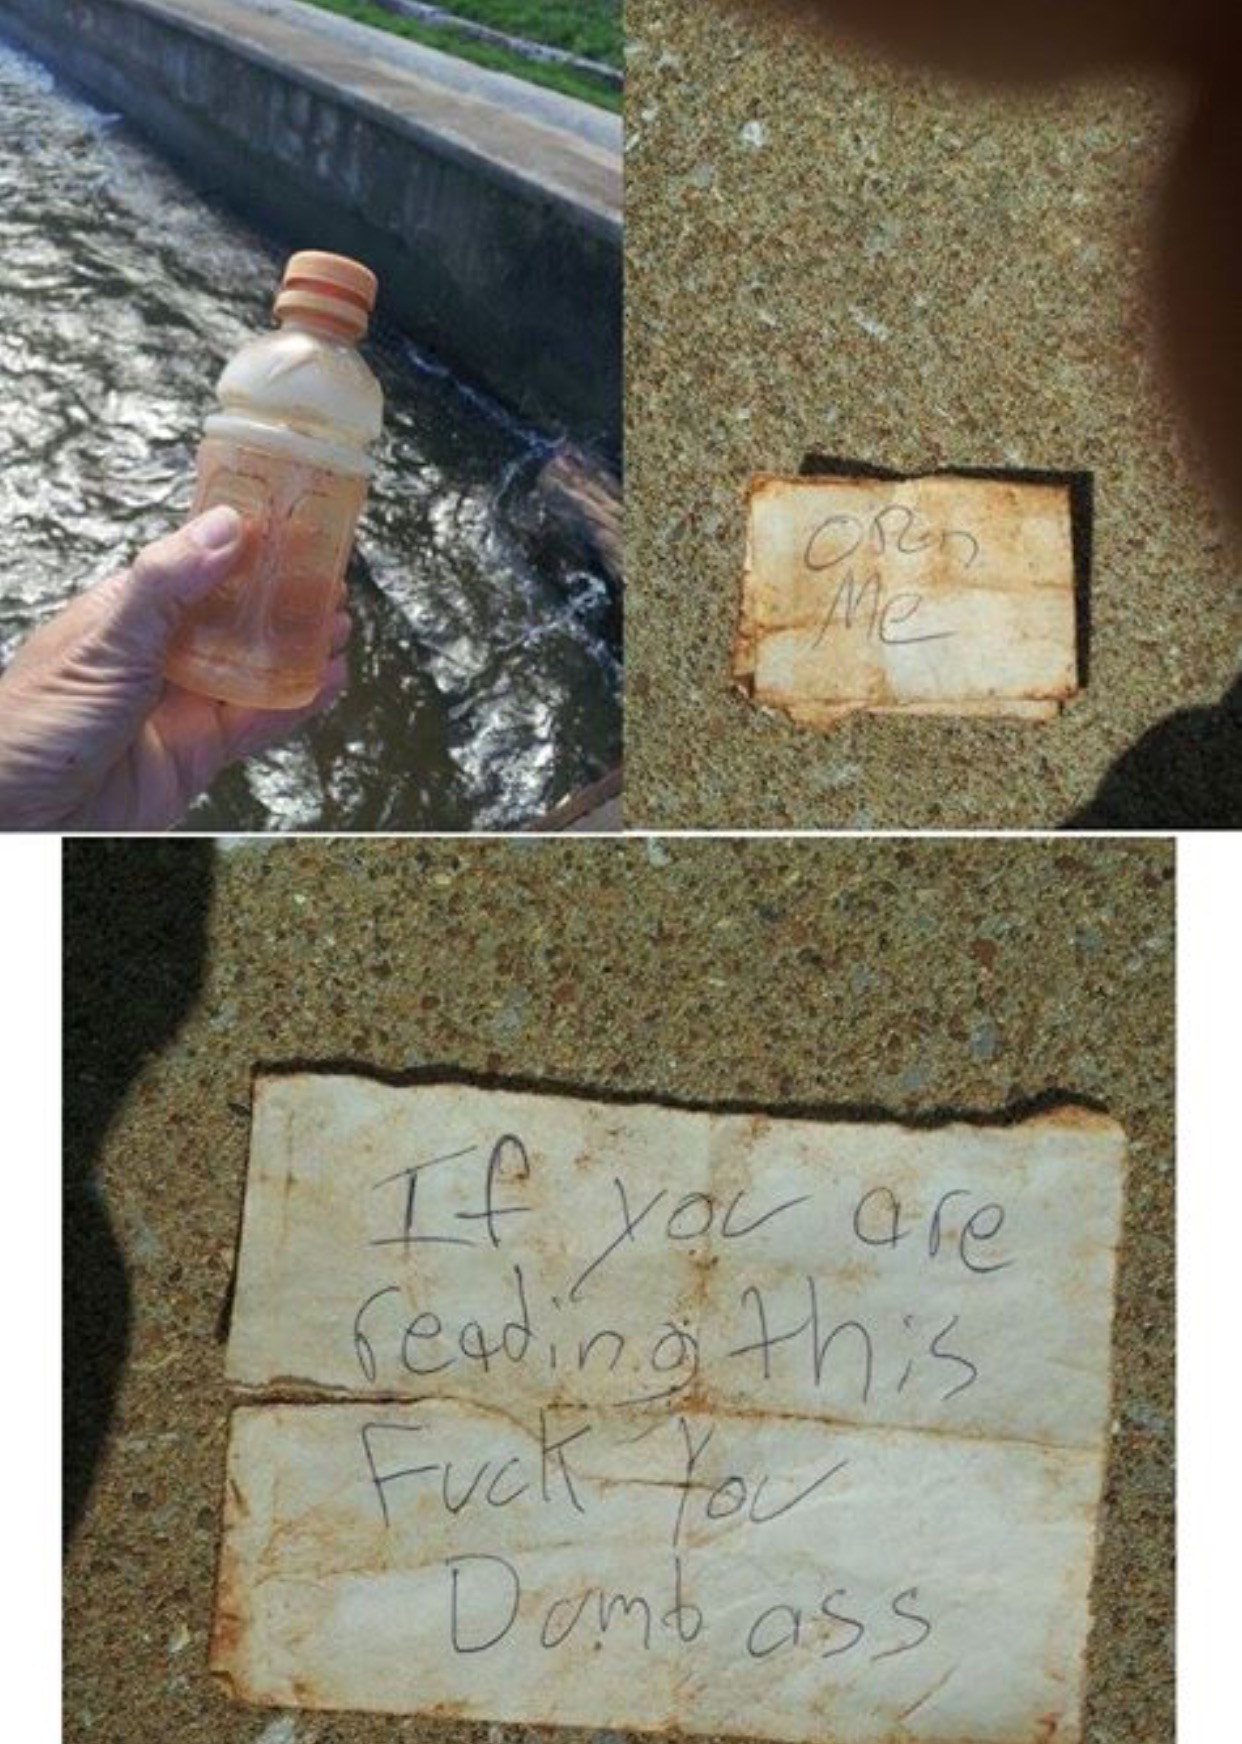 memes - funny message in a bottle - One If you are reading this Fuck to Domb ass